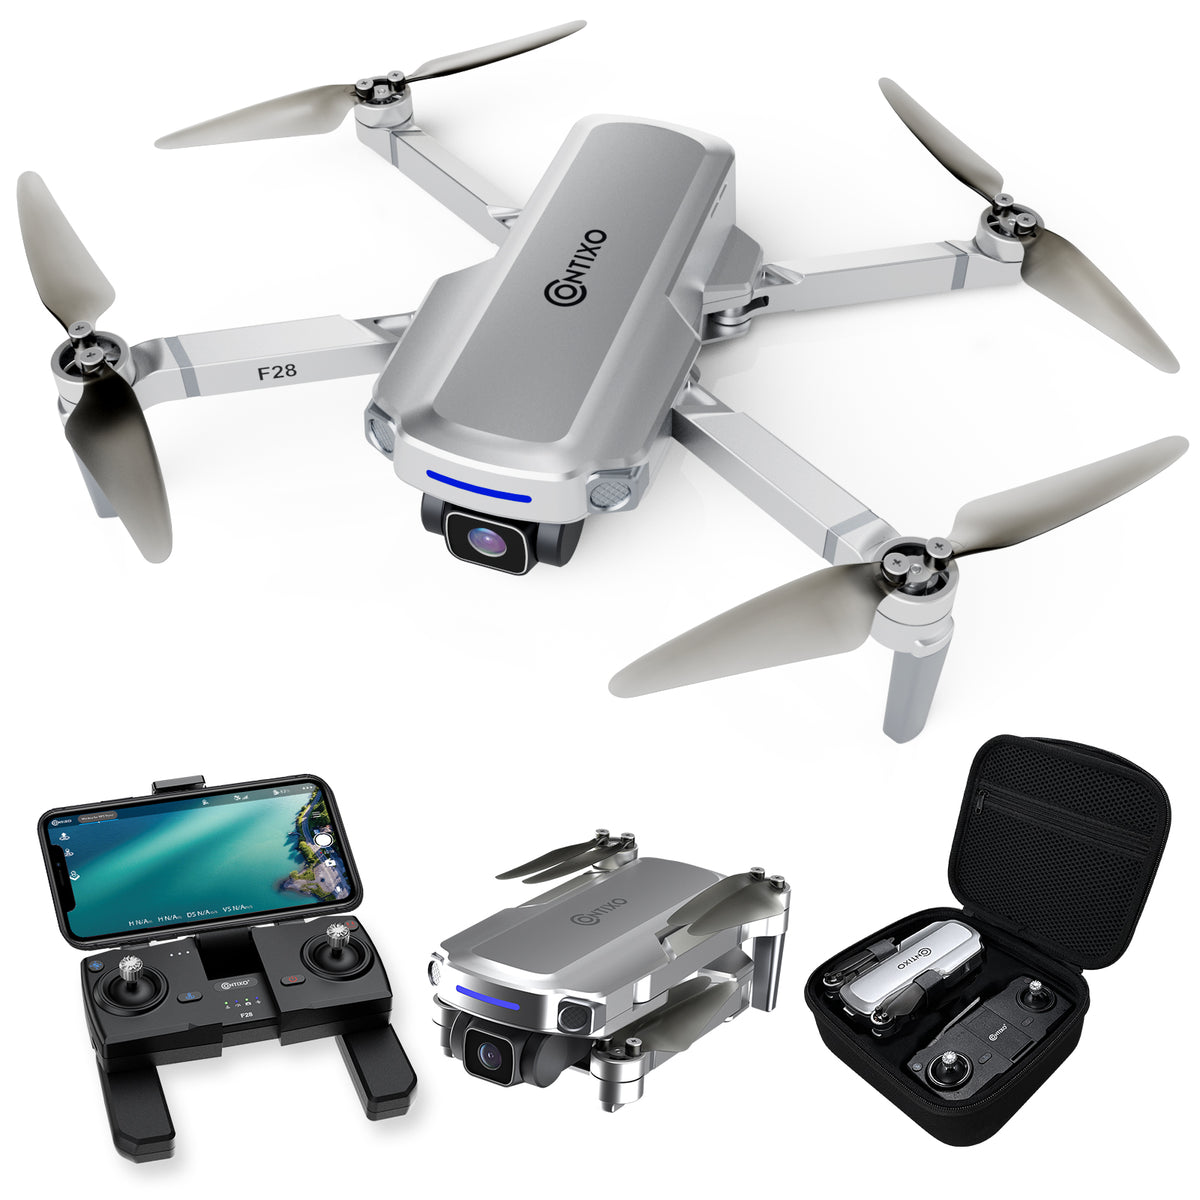  GPS Professional Drone with 4K Camera for Adults Begineer, Dual  Camera 5G WiFi FPV Live Video 40mins Flight Time Drone with Brushless  Motor, Auto Return Follow Me and Outdoor : Toys